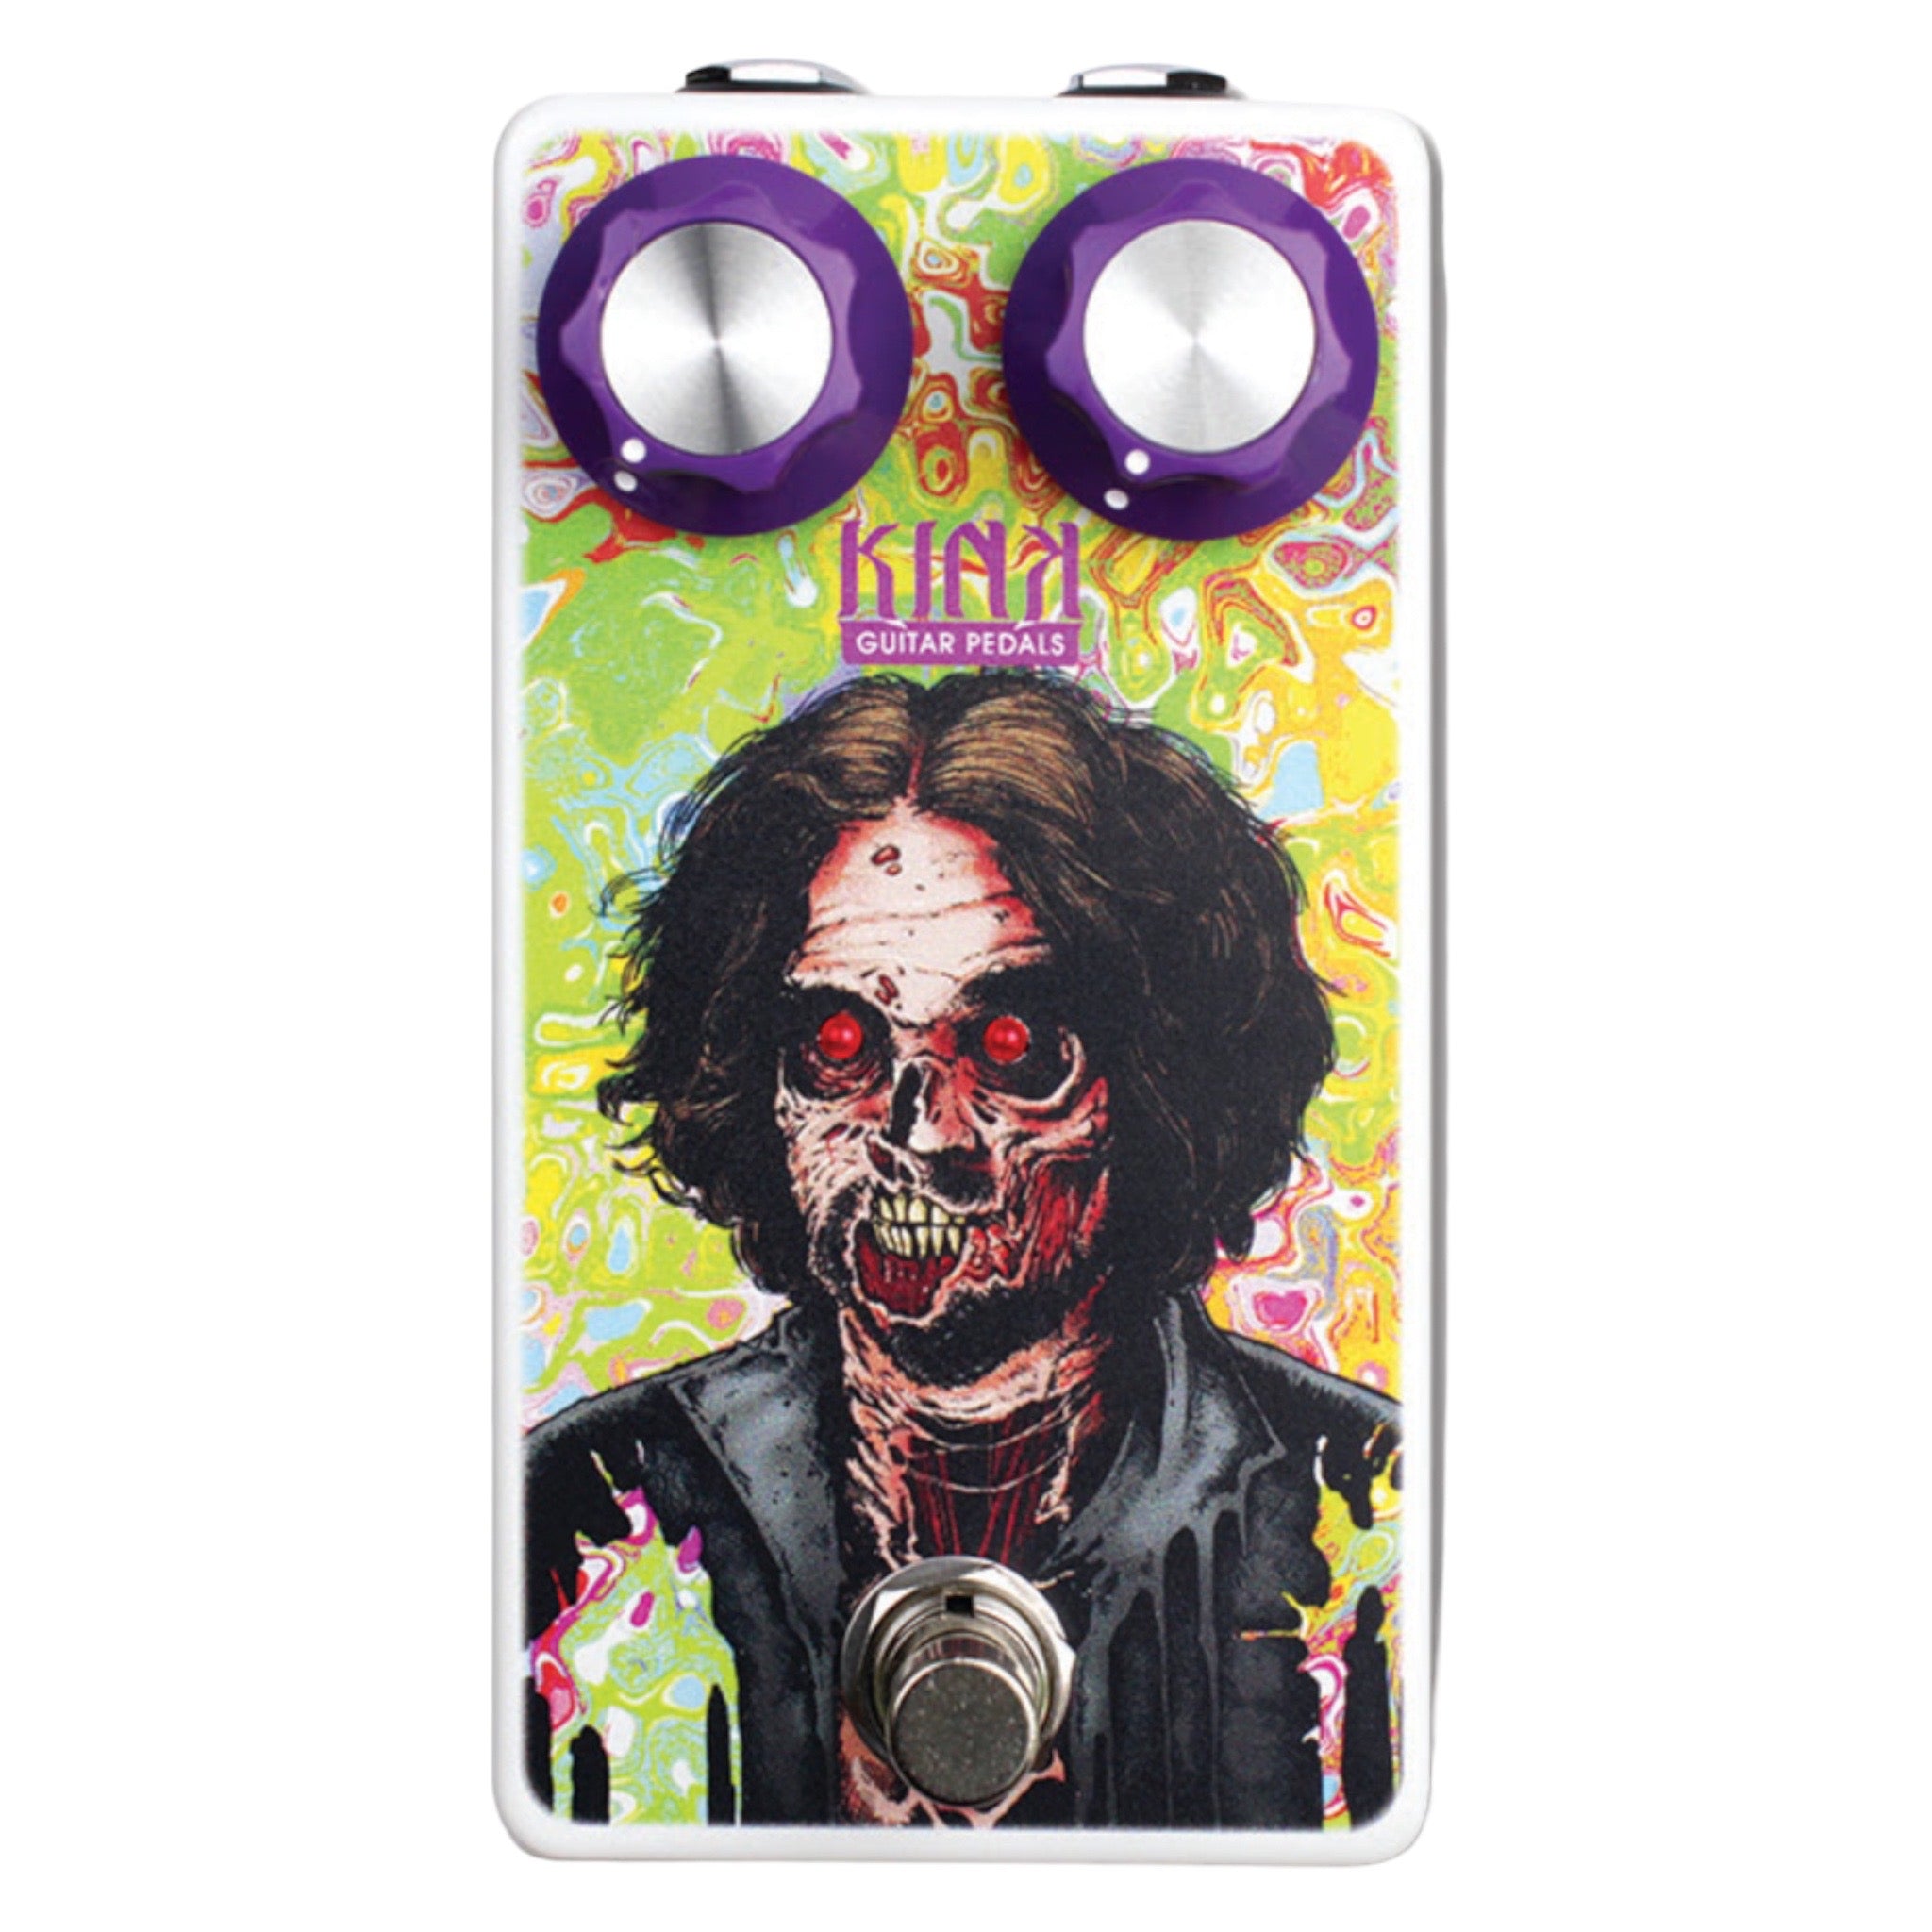 Kink Guitar Pedals Psychedelic Charlie Fuzz Pedal